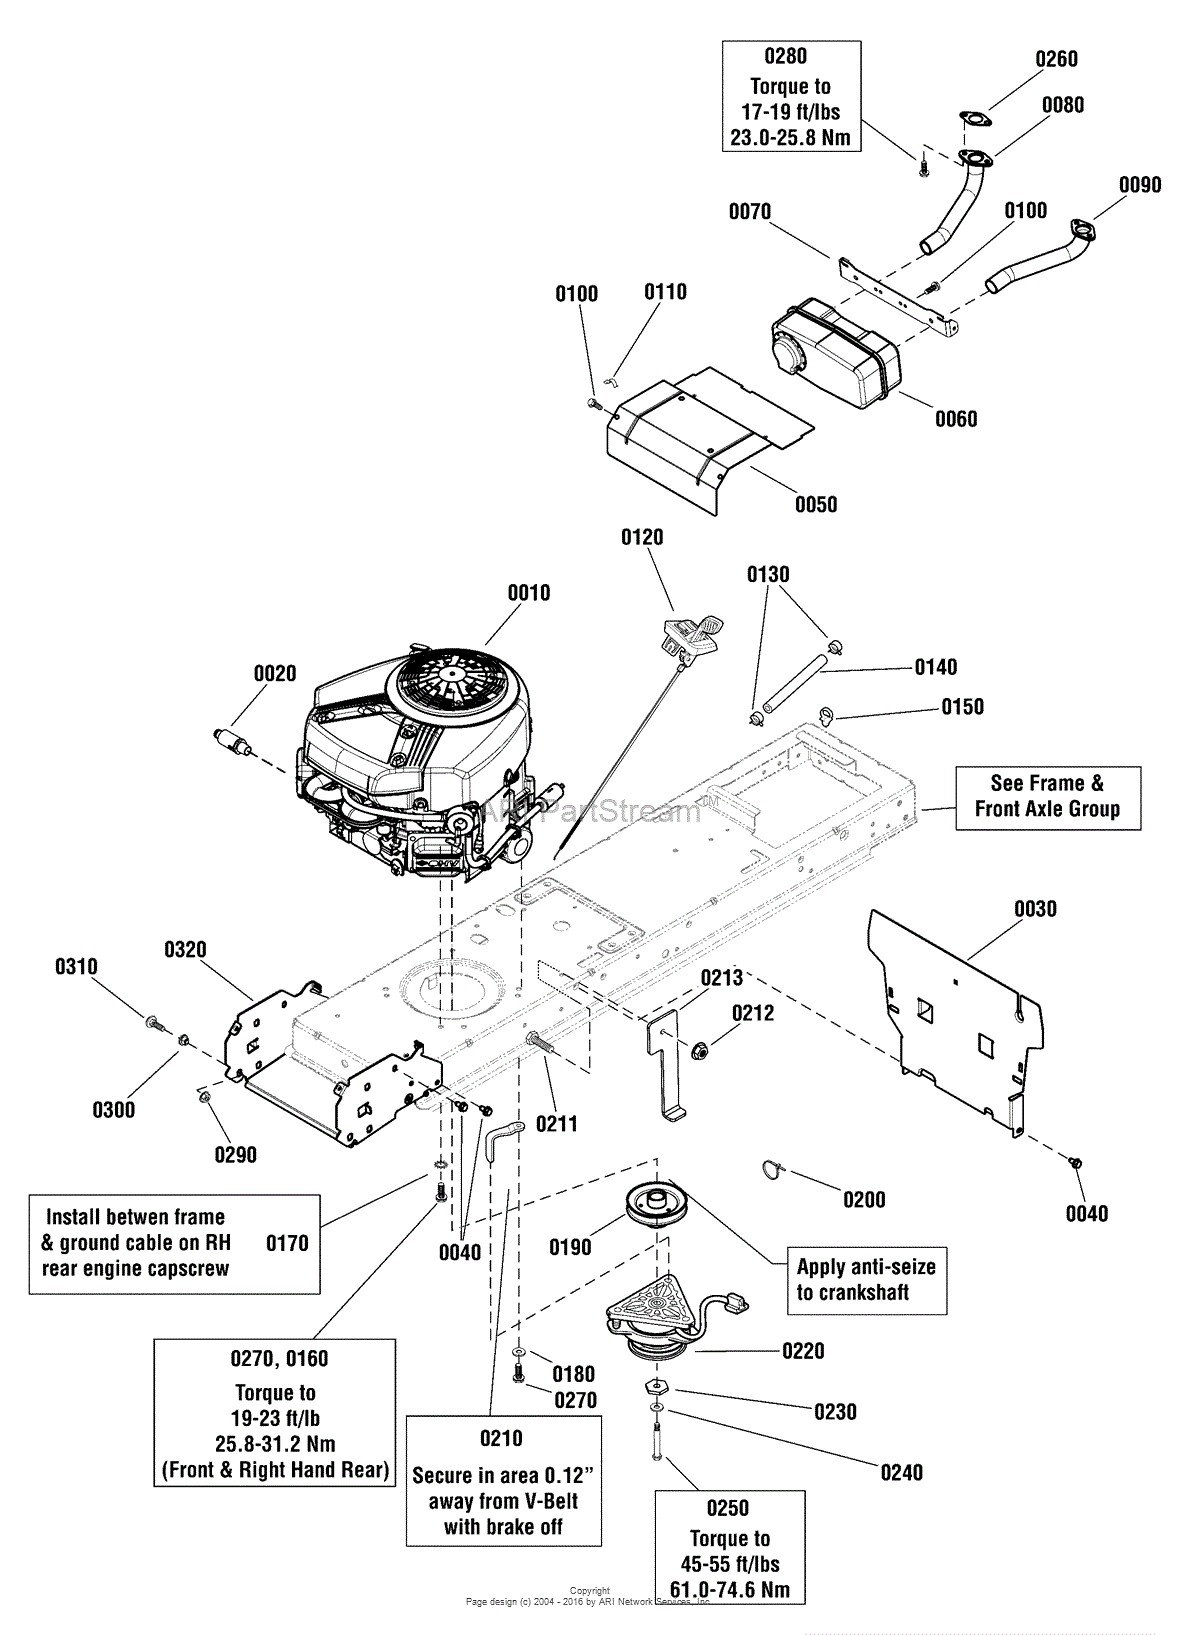 Briggs and Stratton Lawn Mower Parts Diagram Snapper 00 Spx2348 48" 122cm 23 Hp Spx Lawn Tractor 300 Of Briggs and Stratton Lawn Mower Parts Diagram